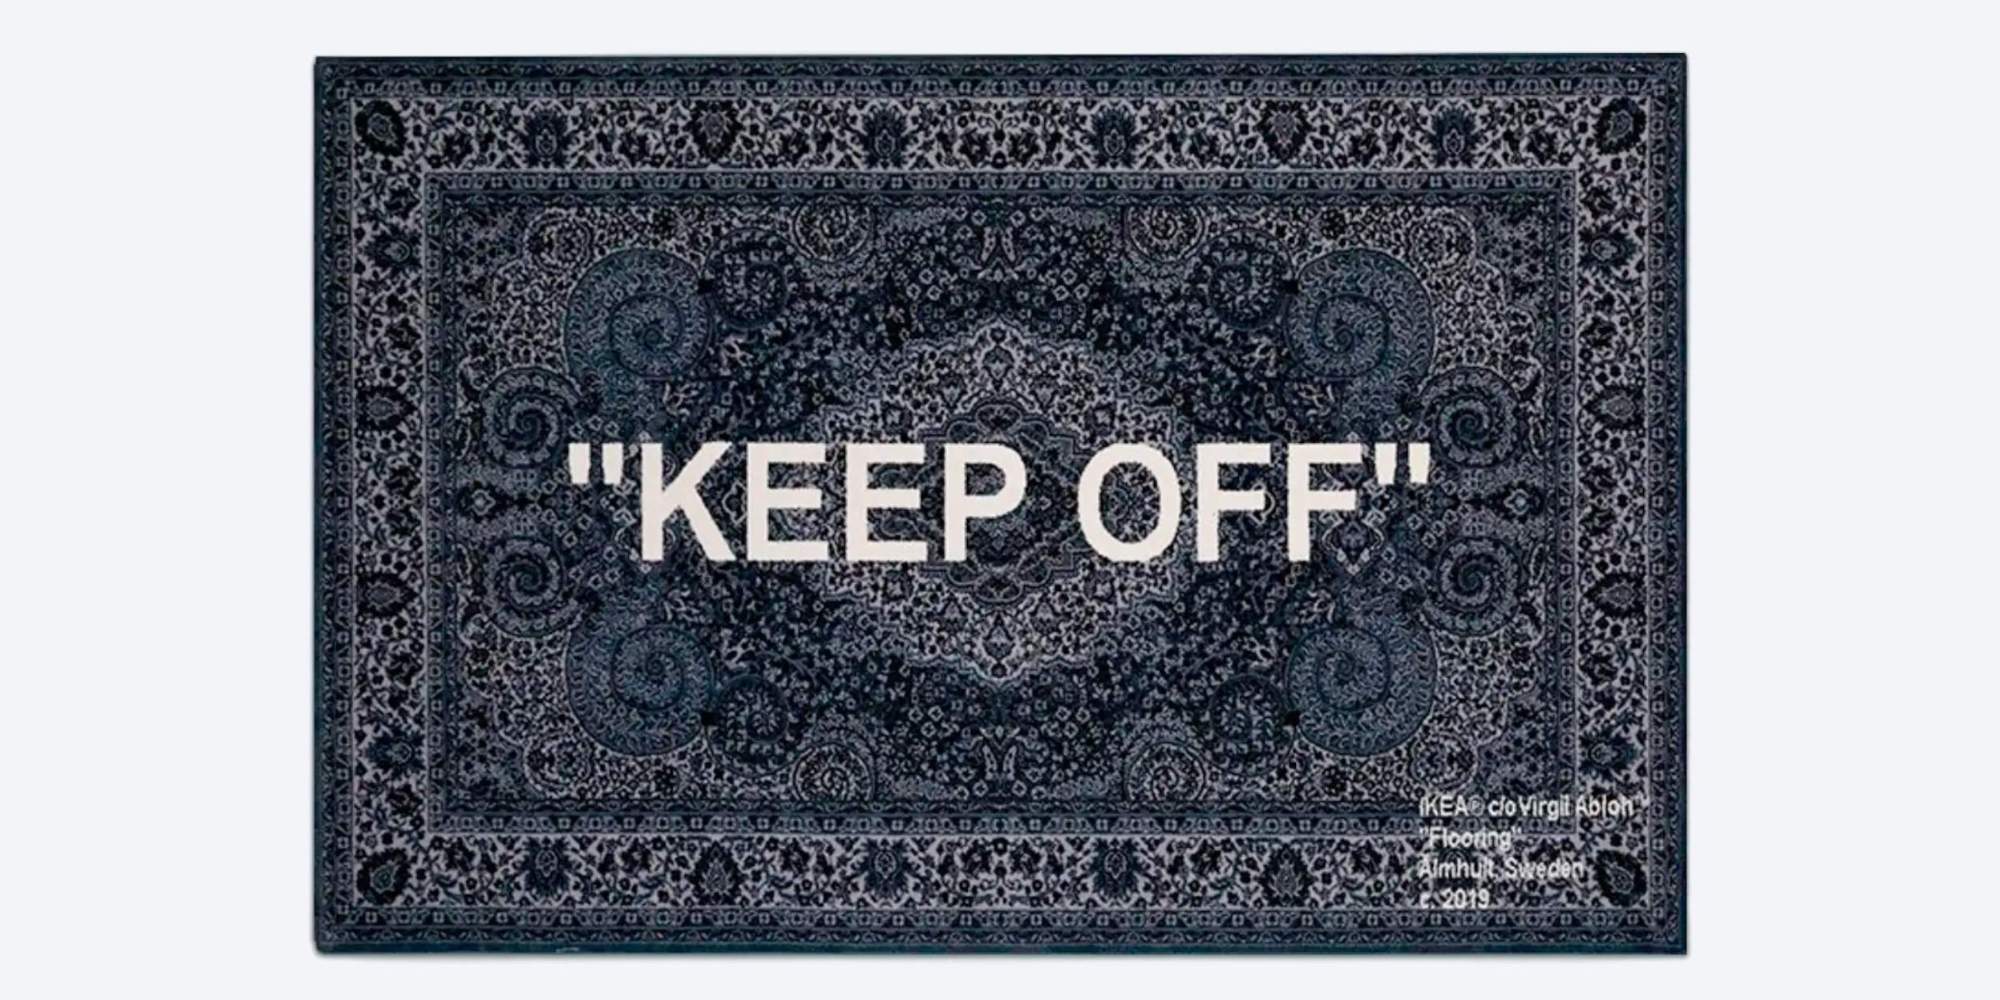 The Virgil Abloh IKEA KEEP OFF Rug is Worth Almost $3,000 - Resell Calendar